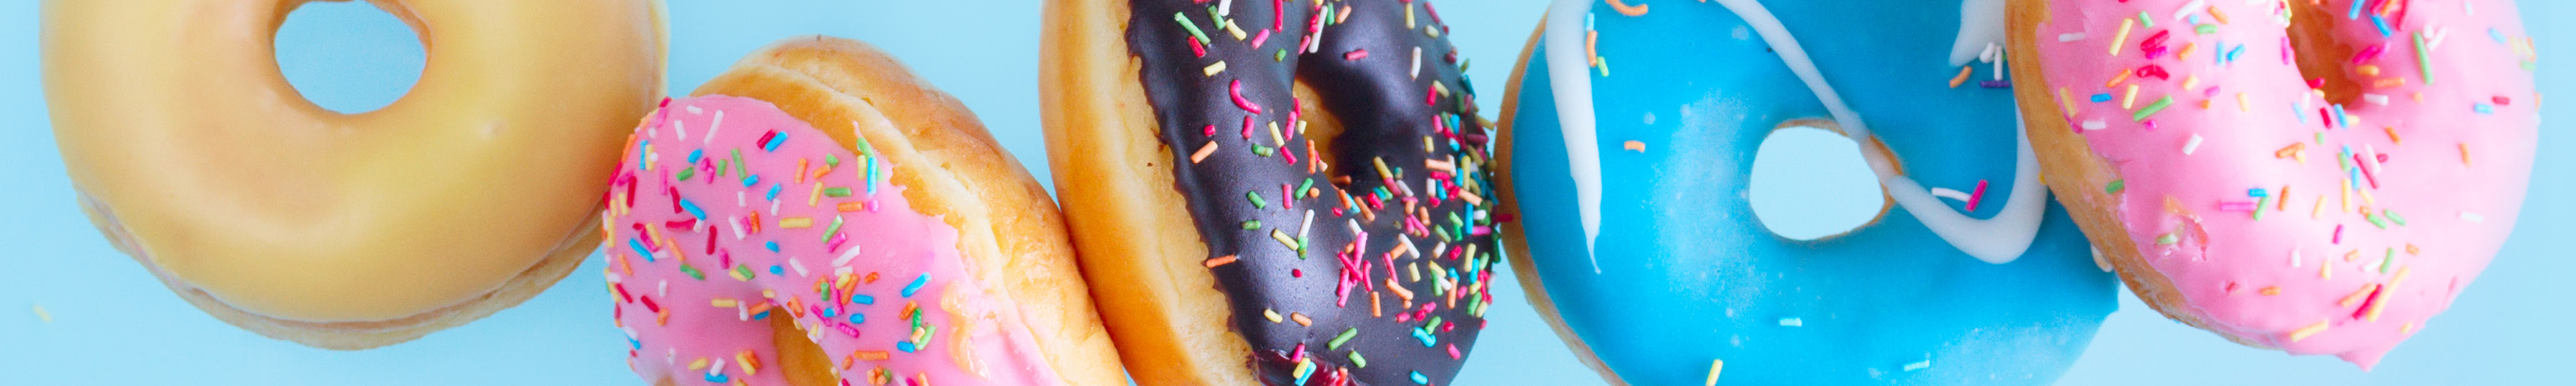 Deals you donut want to miss